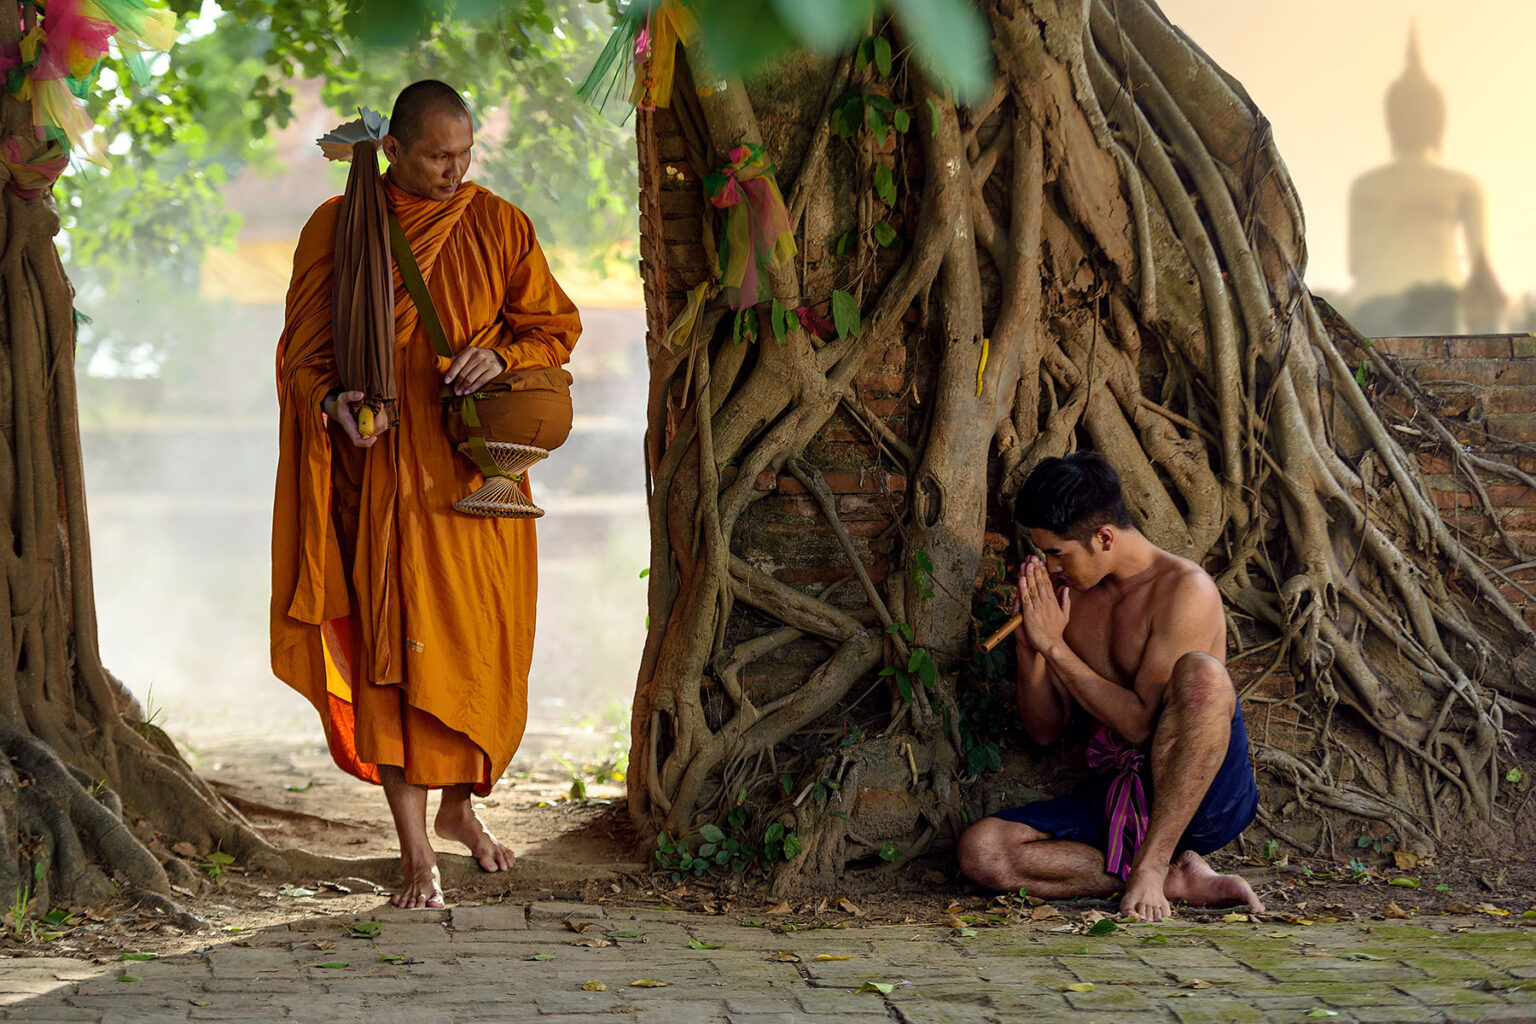 Man sitting on the ground near a tree, and greets a passing monk with a traditonal Thai wai. A large statue of Buddha looms in the background.